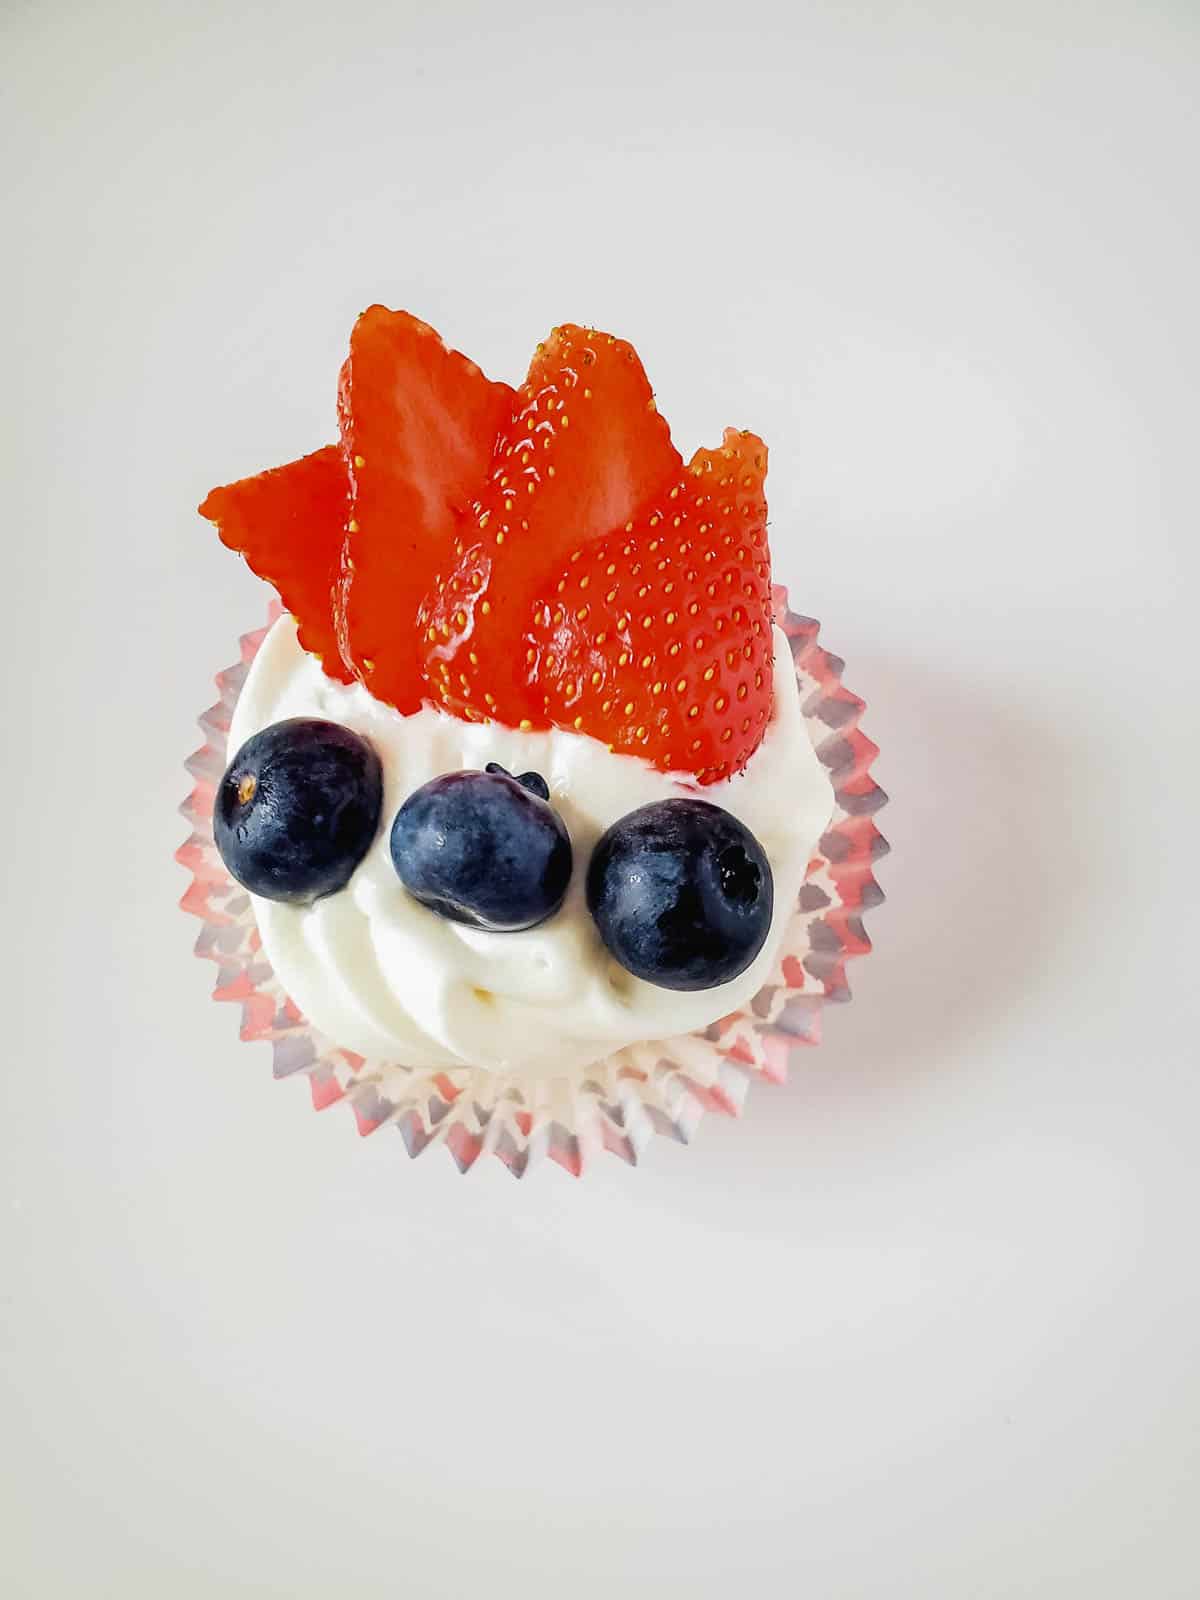 An angel food cake cupcake topped with white frosting and berries for 4th of July.